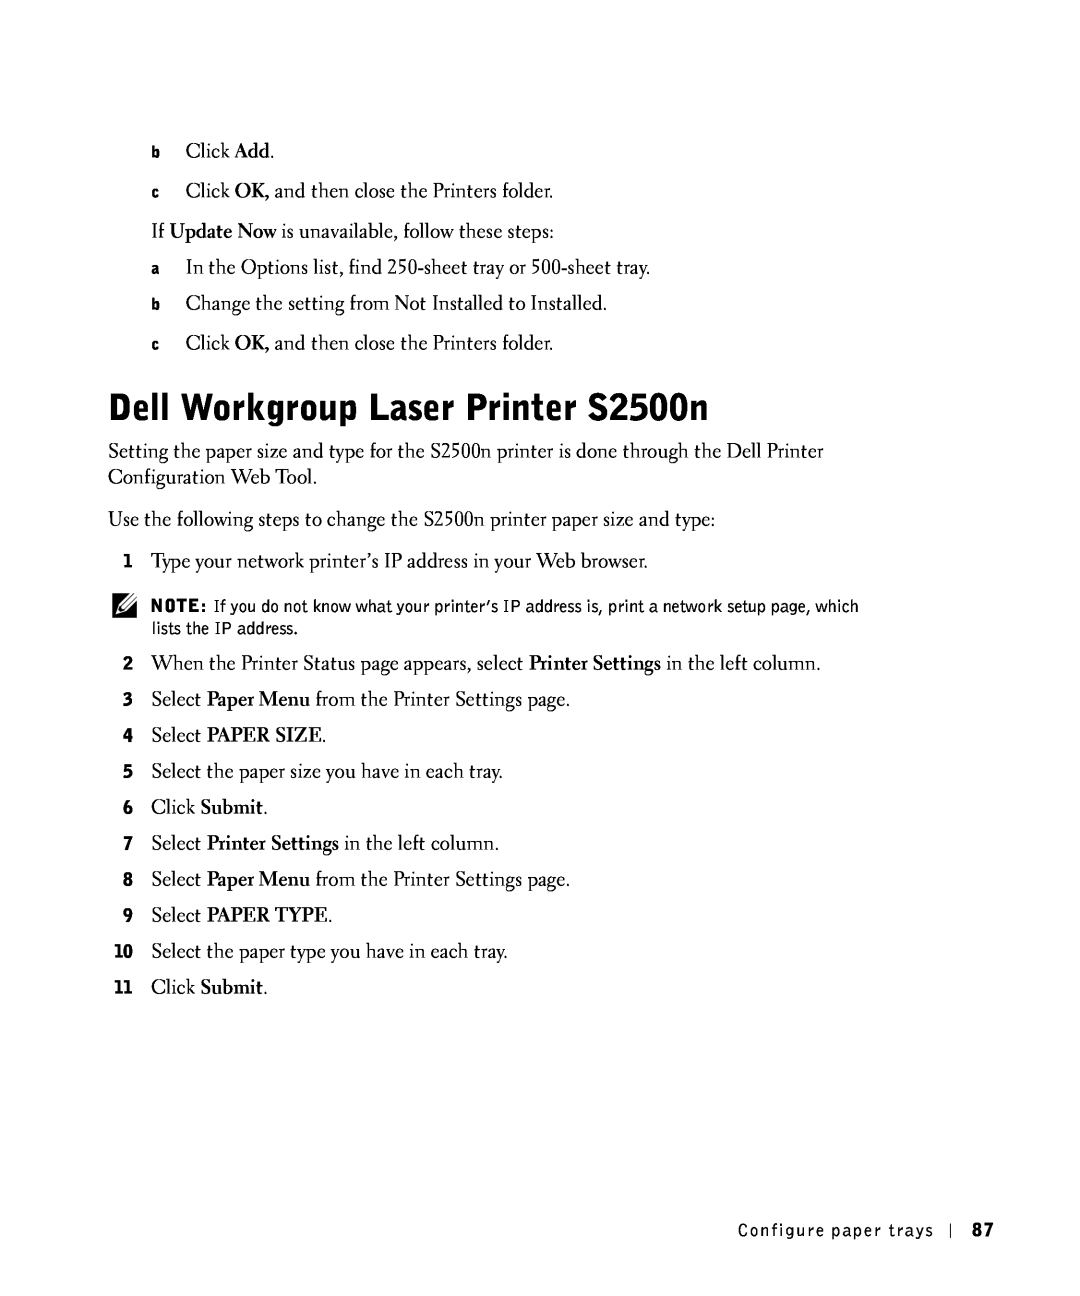 Dell owner manual Dell Workgroup Laser Printer S2500n, Select PAPER SIZE, Select PAPER TYPE 